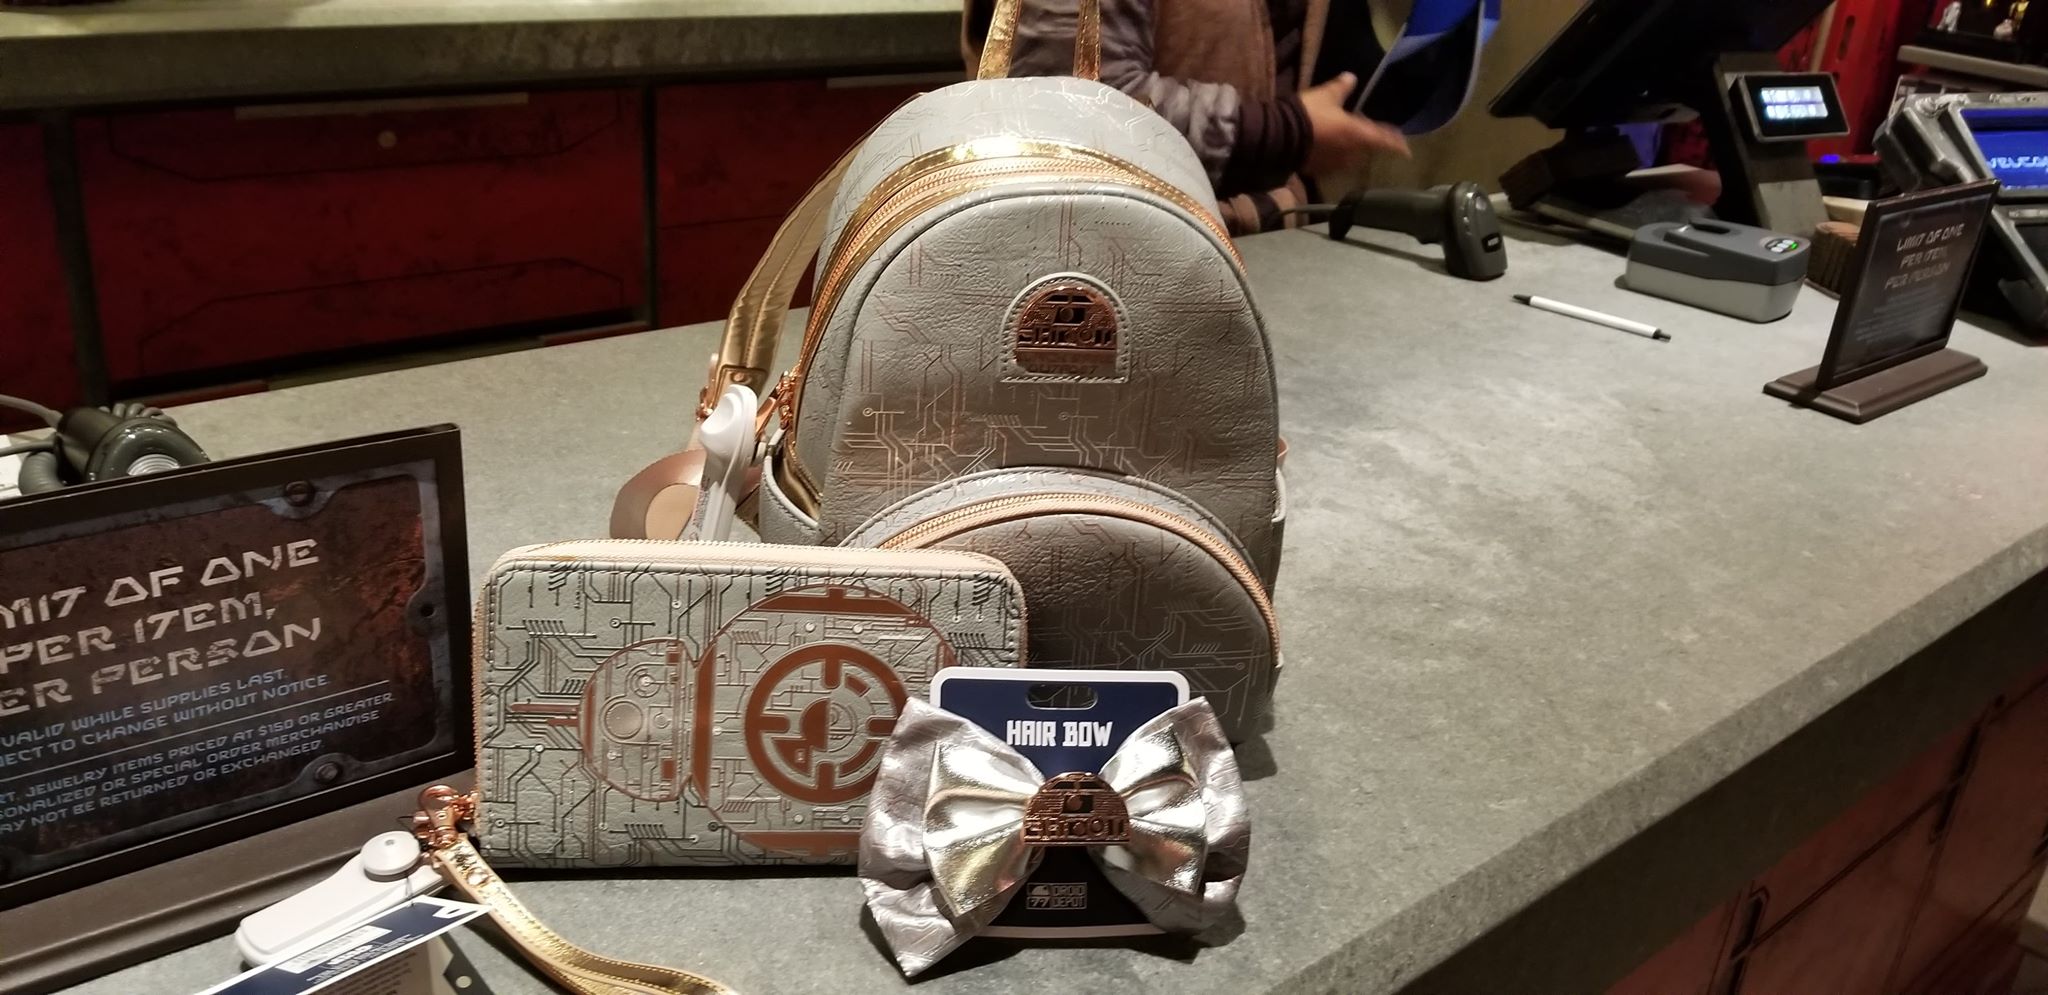 Galactic Cute Droid Accessories From The Droid Depot In Galaxy’s Edge